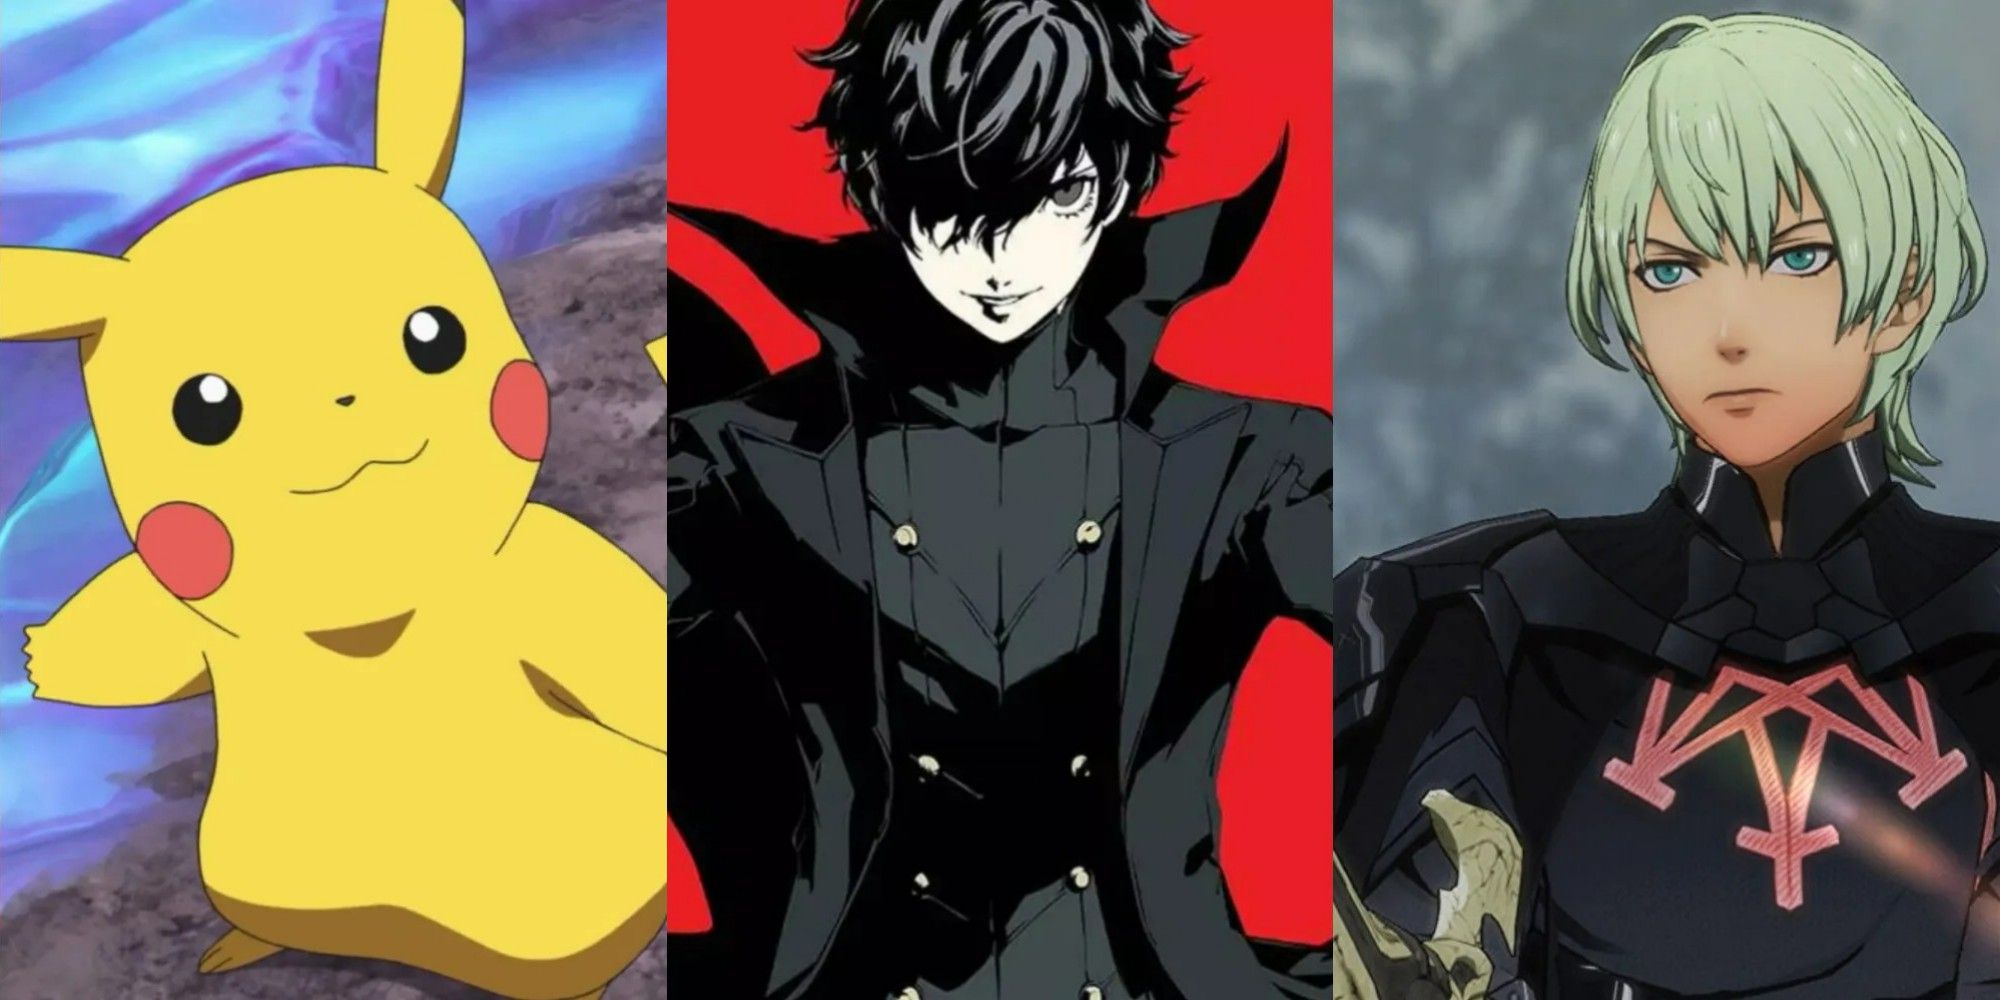 A split image of Pikachu from Pokemon, Joker from Persona 5, and Byleth from Fire Emblem